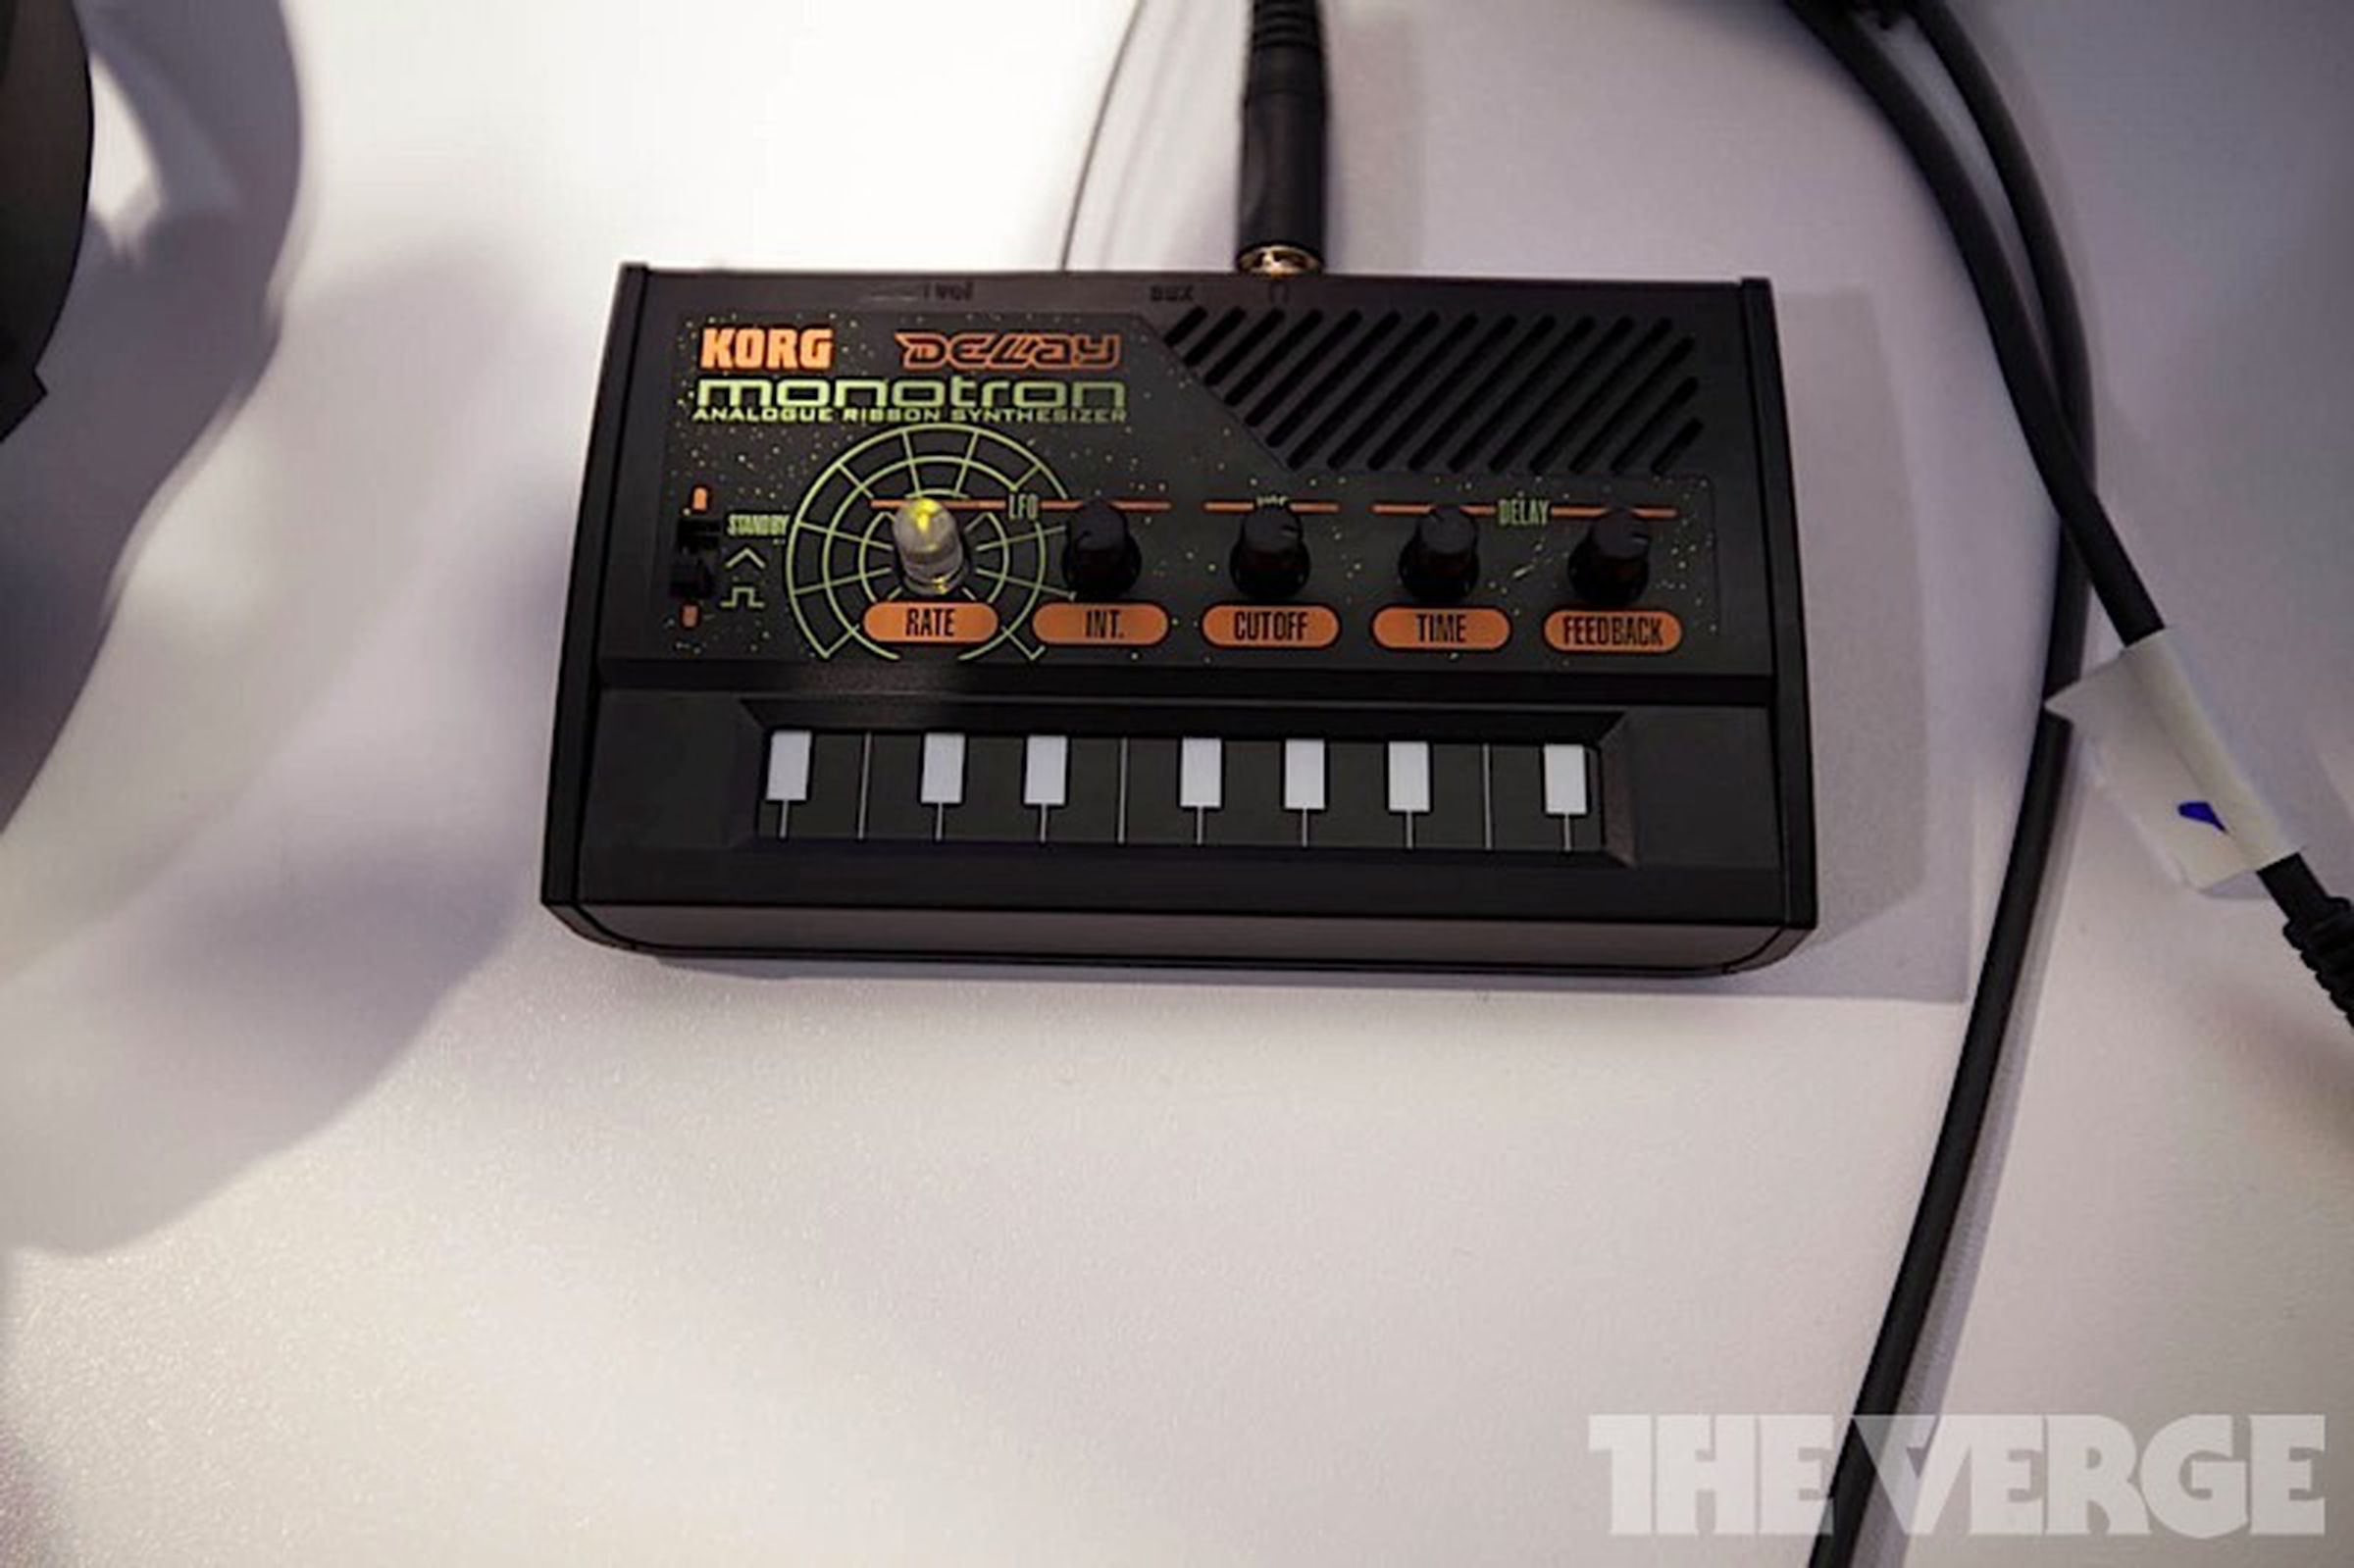 New Korg pocket instruments and effects for NAMM 2012